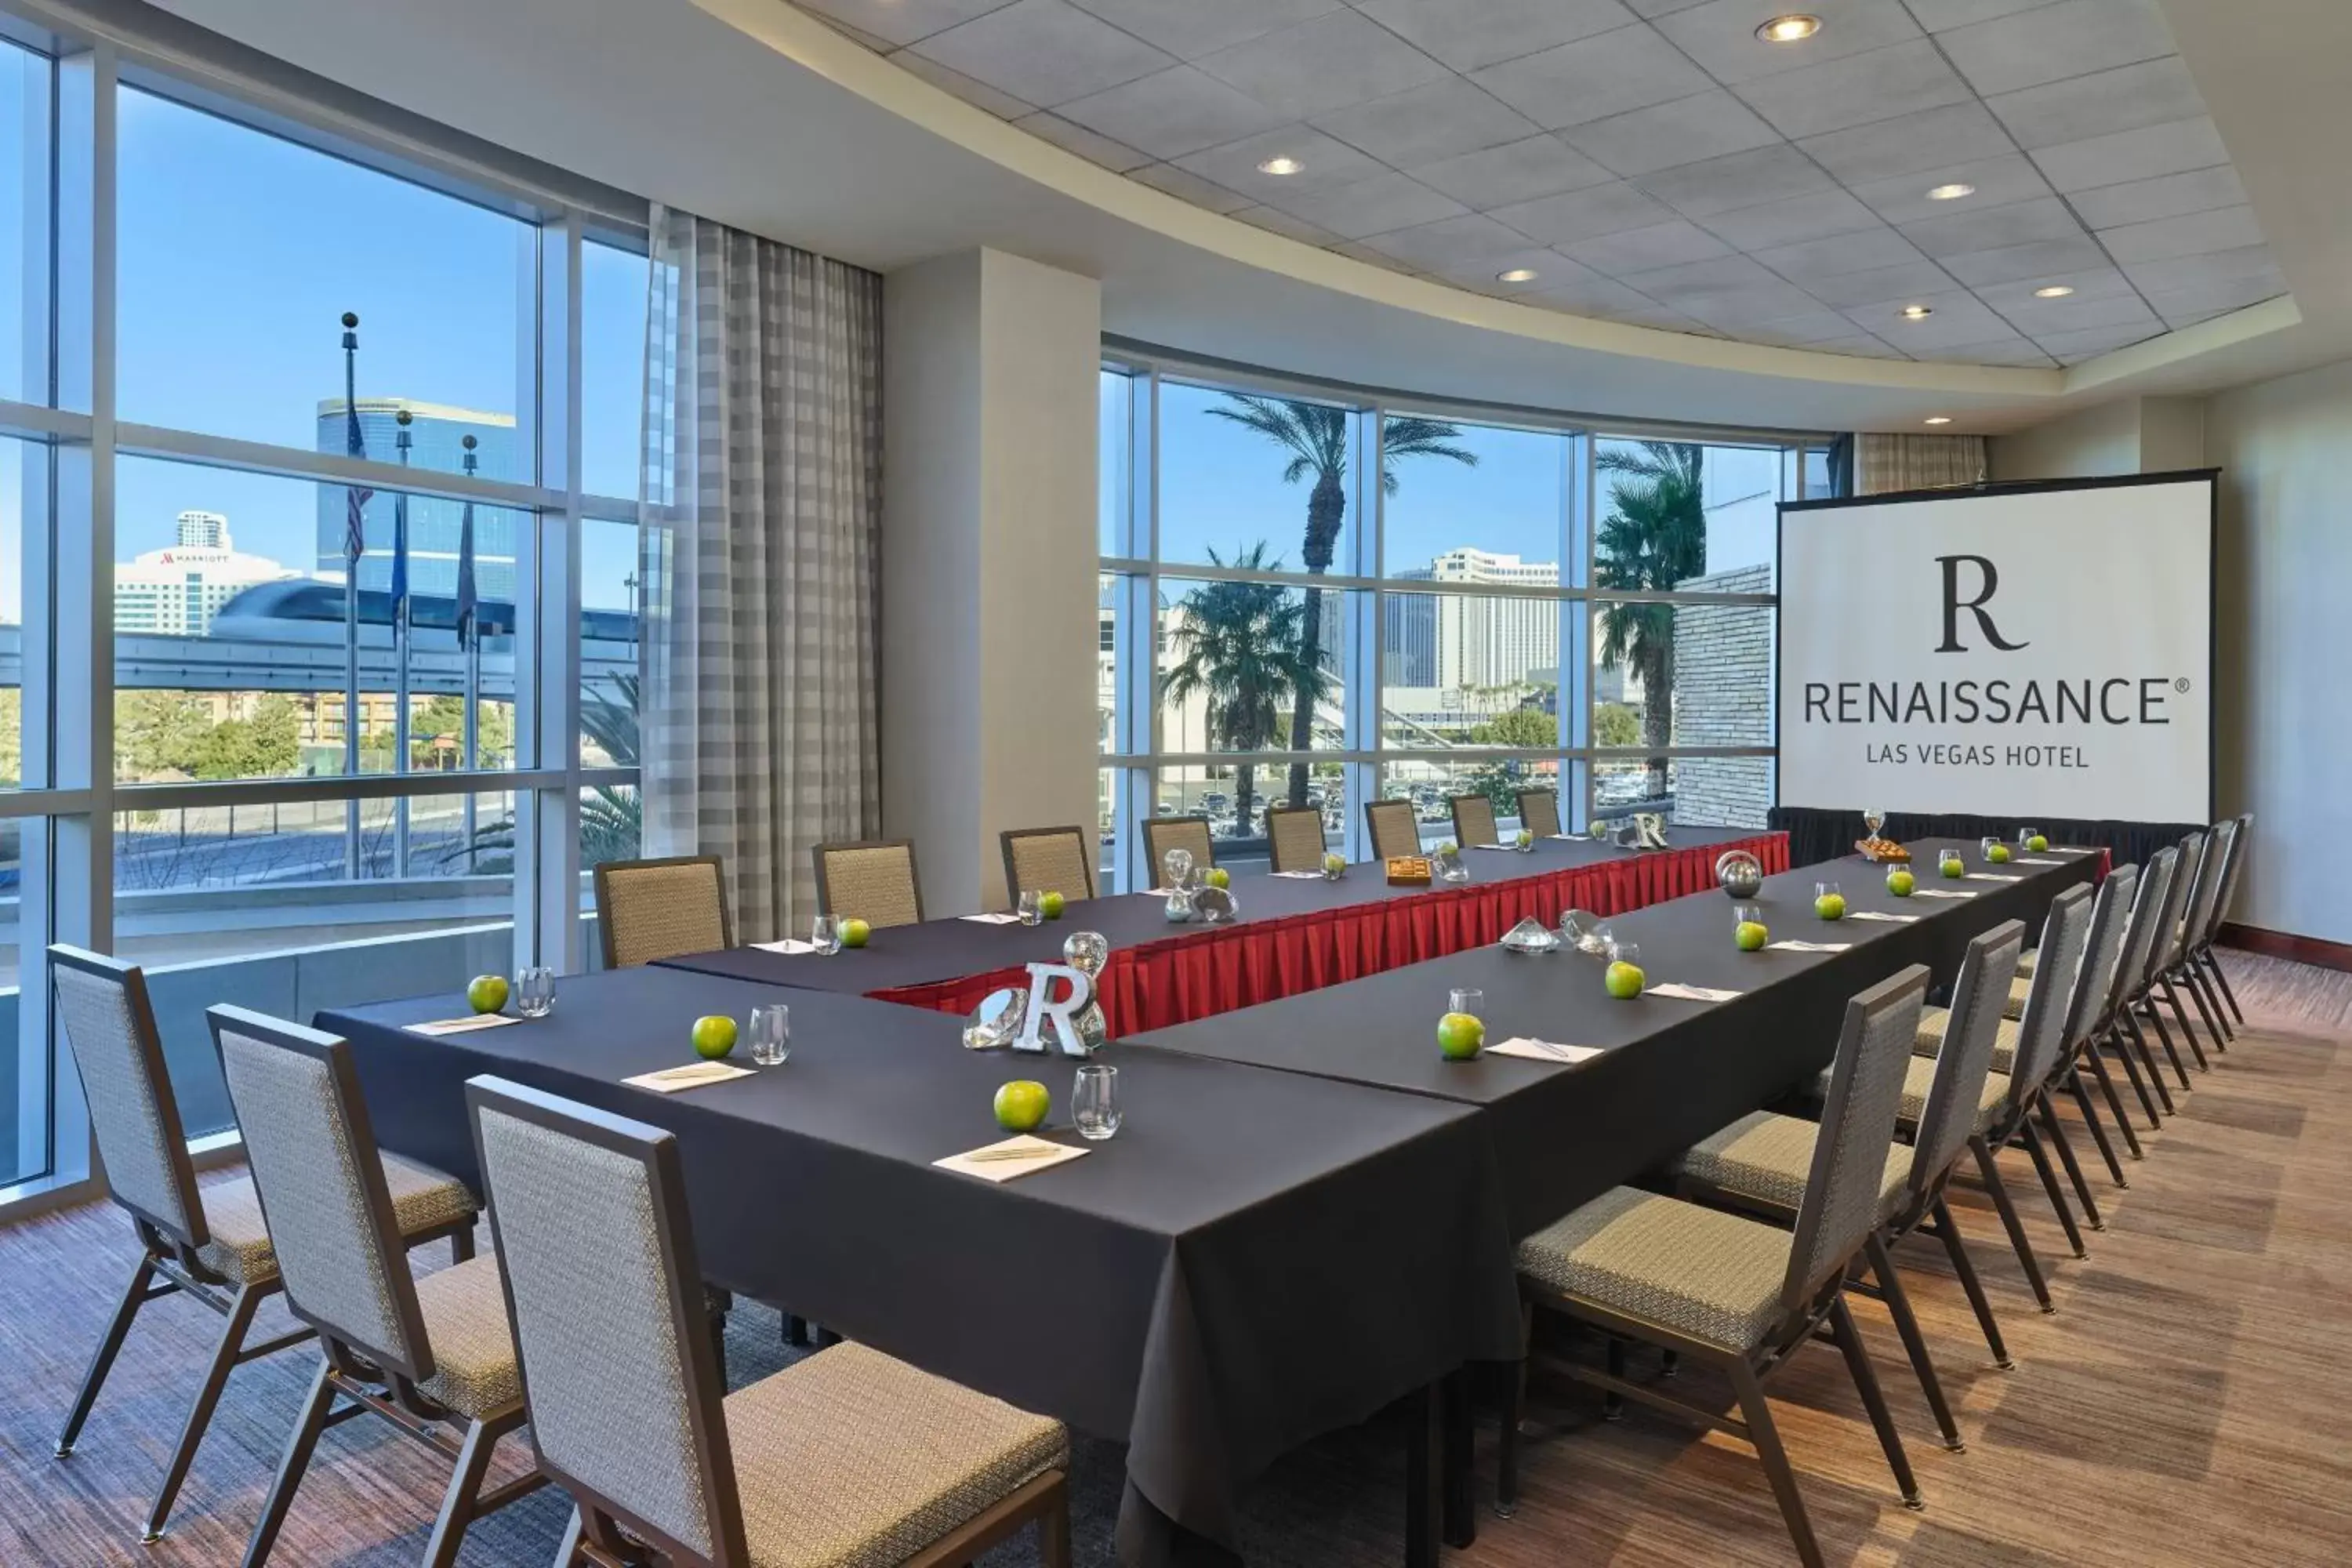 Meeting/conference room in Renaissance Las Vegas Hotel